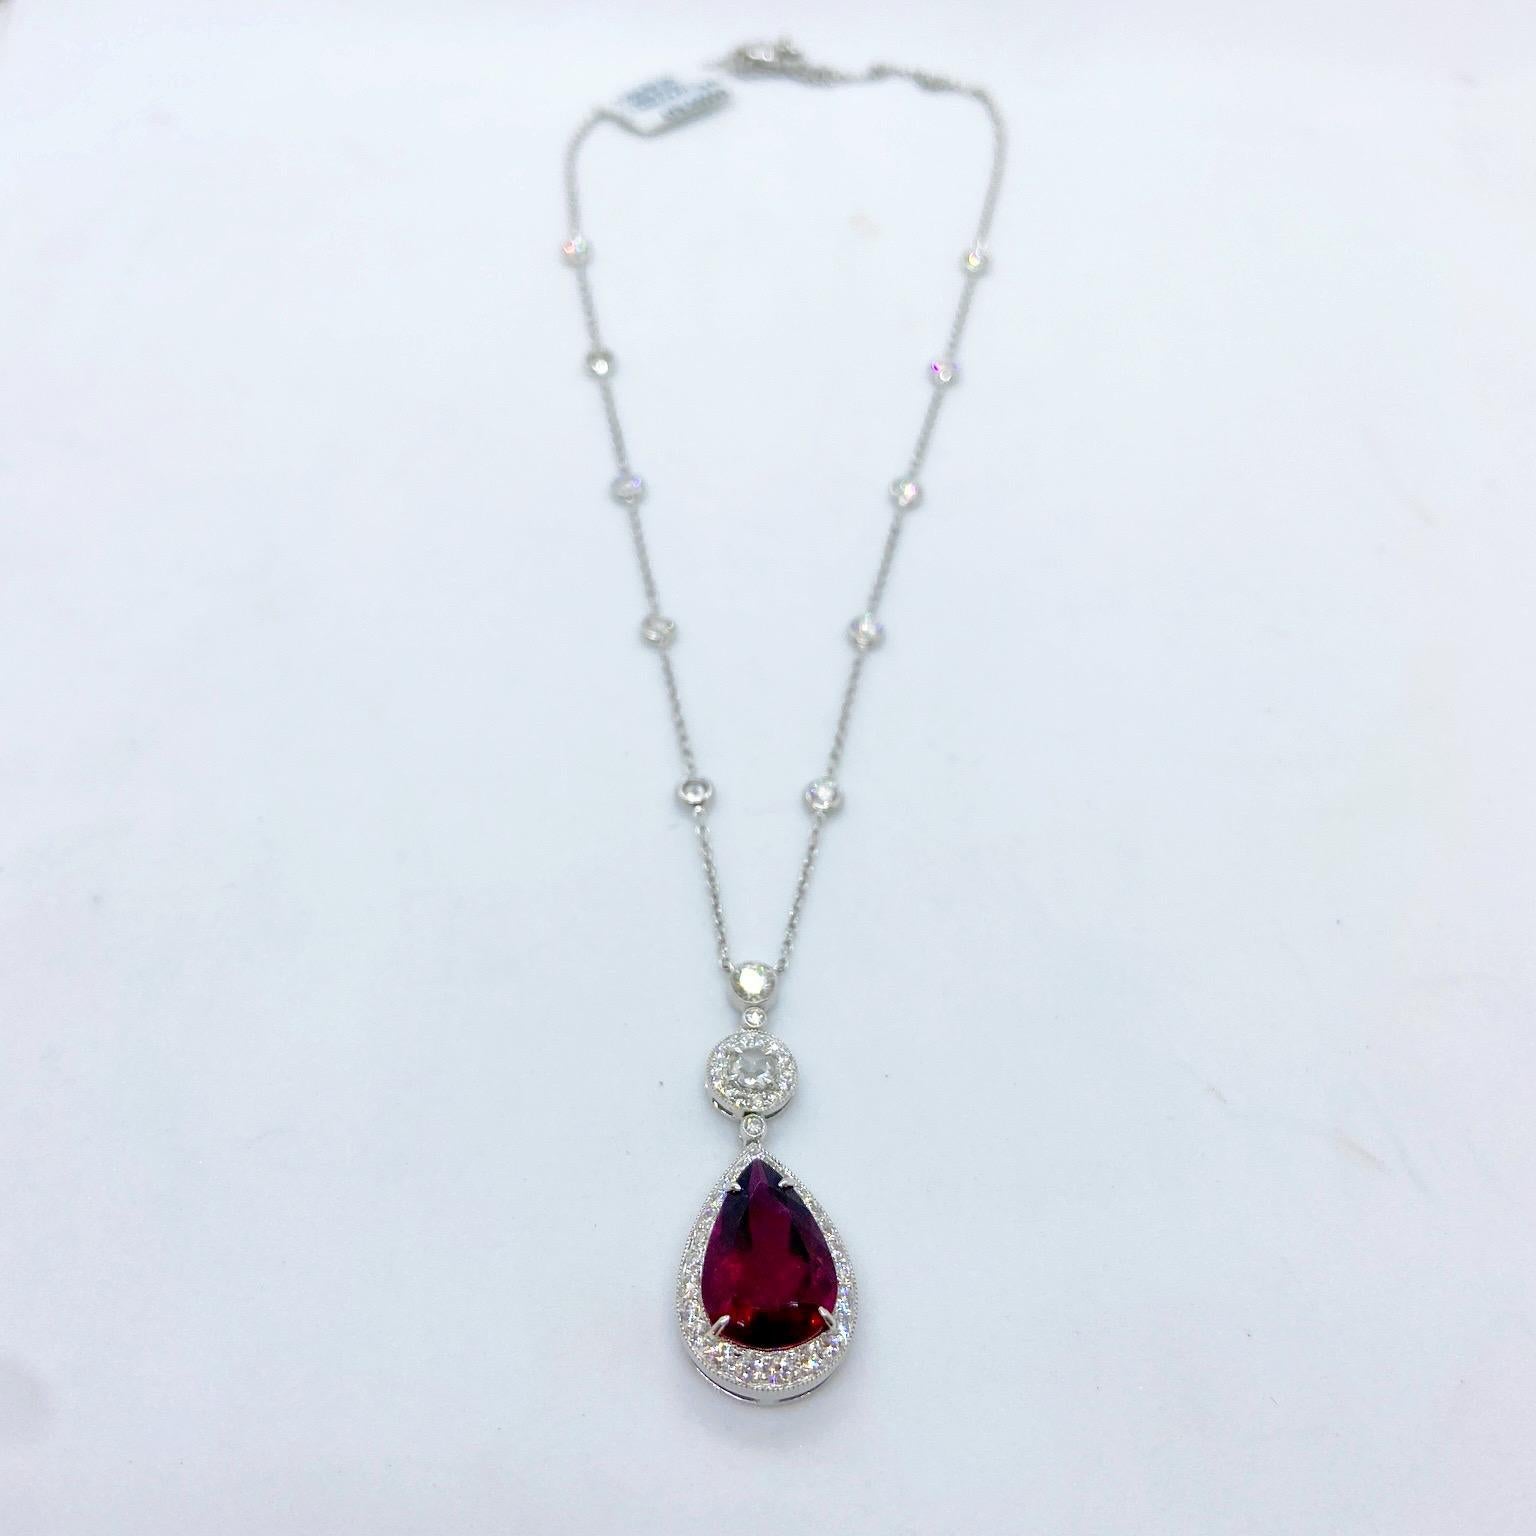 Romantic 18 Karat Gold and Diamond Pendant with 3.42 Carat Rubellite Pear Shaped Drop For Sale